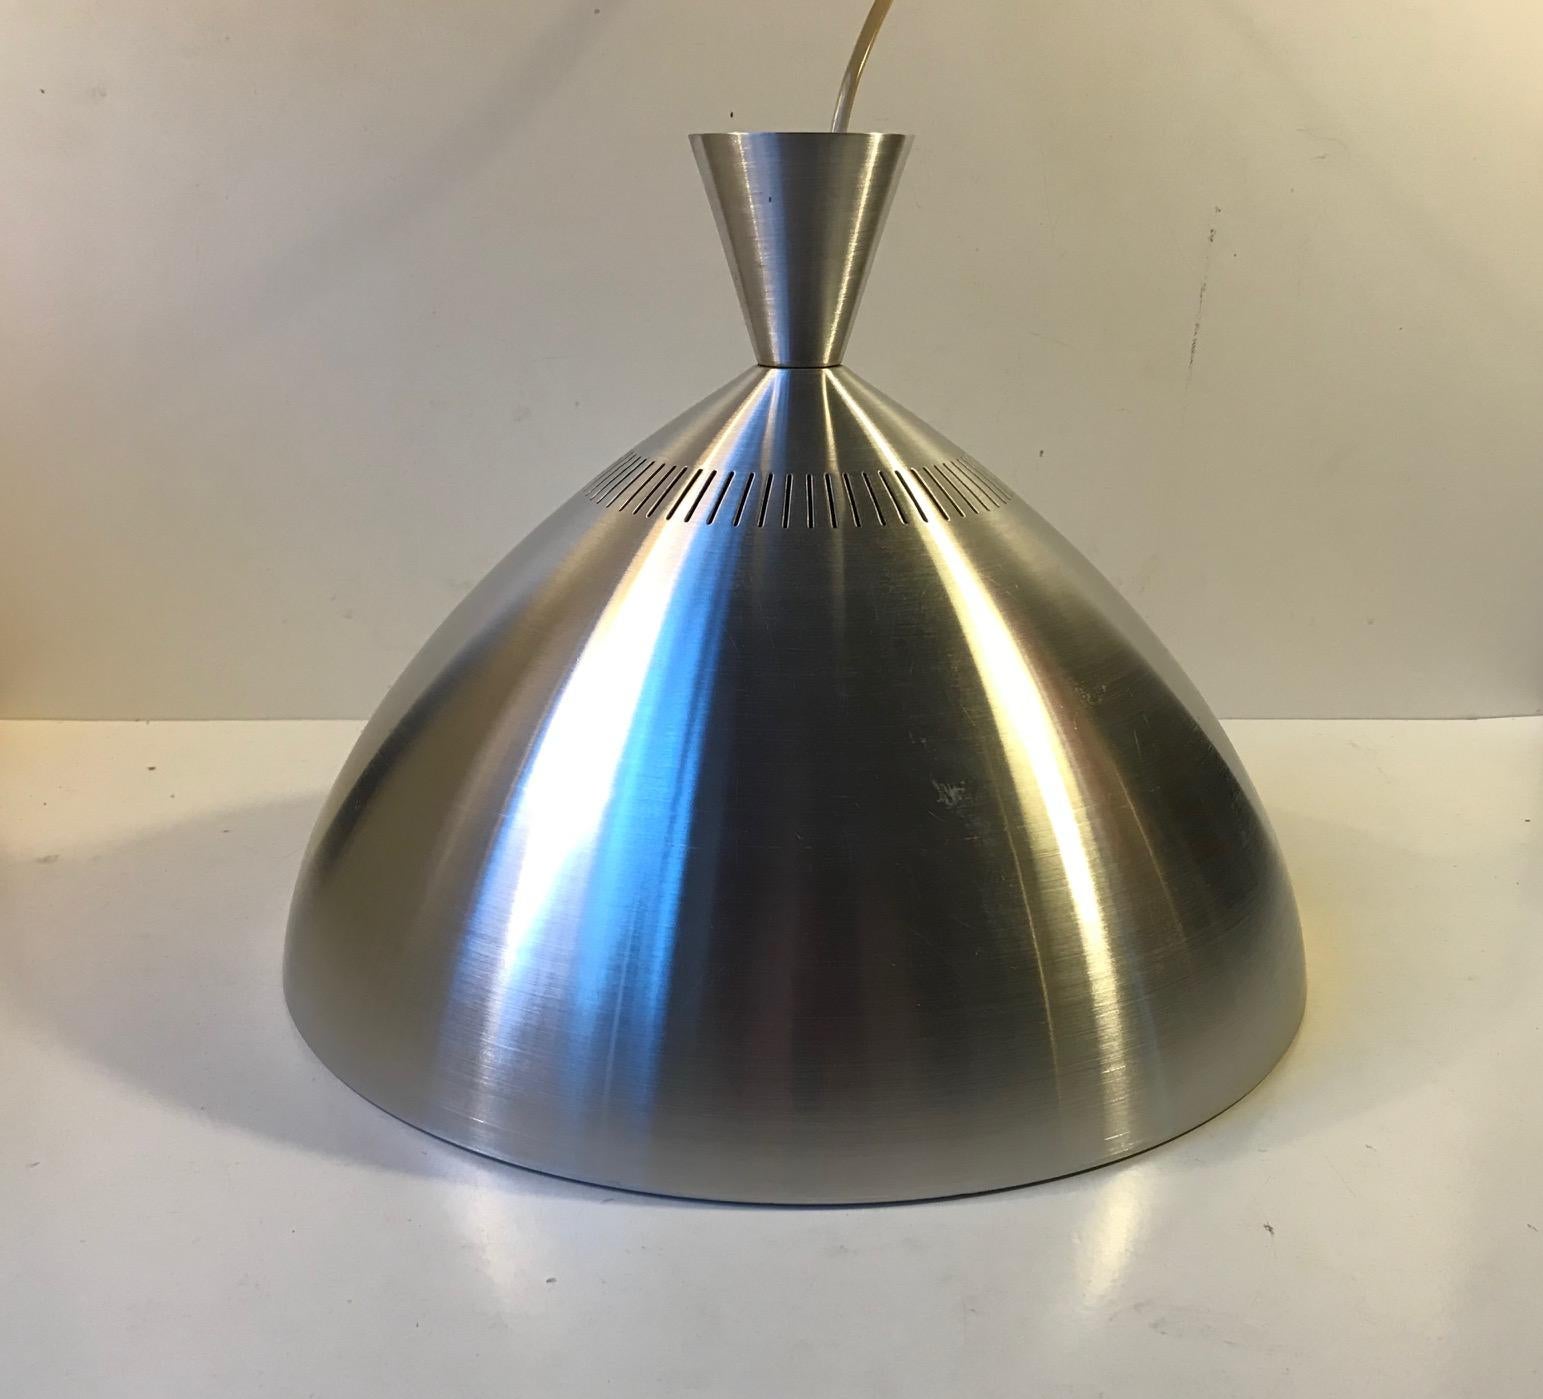 Scandinavian modern pendant light by Lyfa in Denmark. Designed and manufactured during the late 1960s in a style reminiscent of Jo Hammerborg Vega pendant lamp. It is made from partially perforated and brushed aluminium. The inside of the shade is